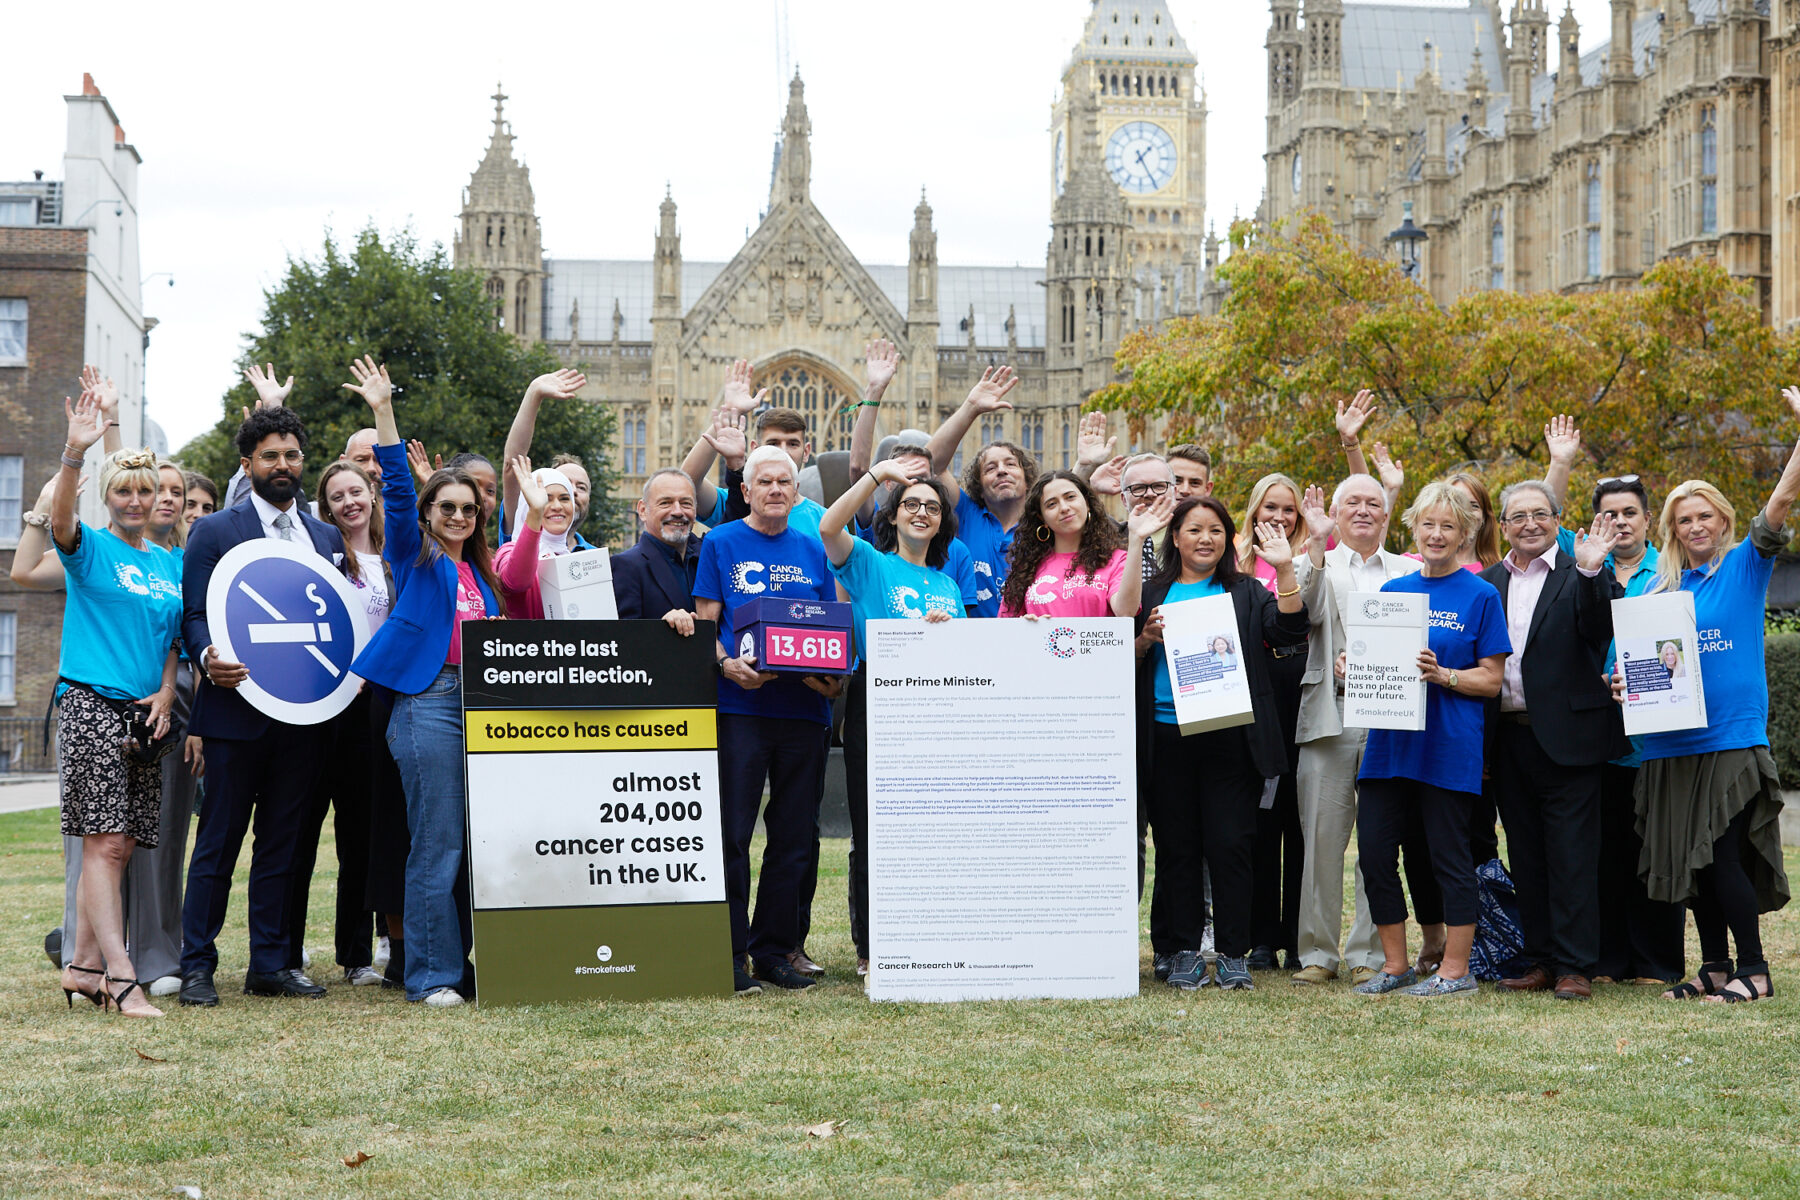 Smokefree UK Supporters gathered on College Green before the petition hand-in